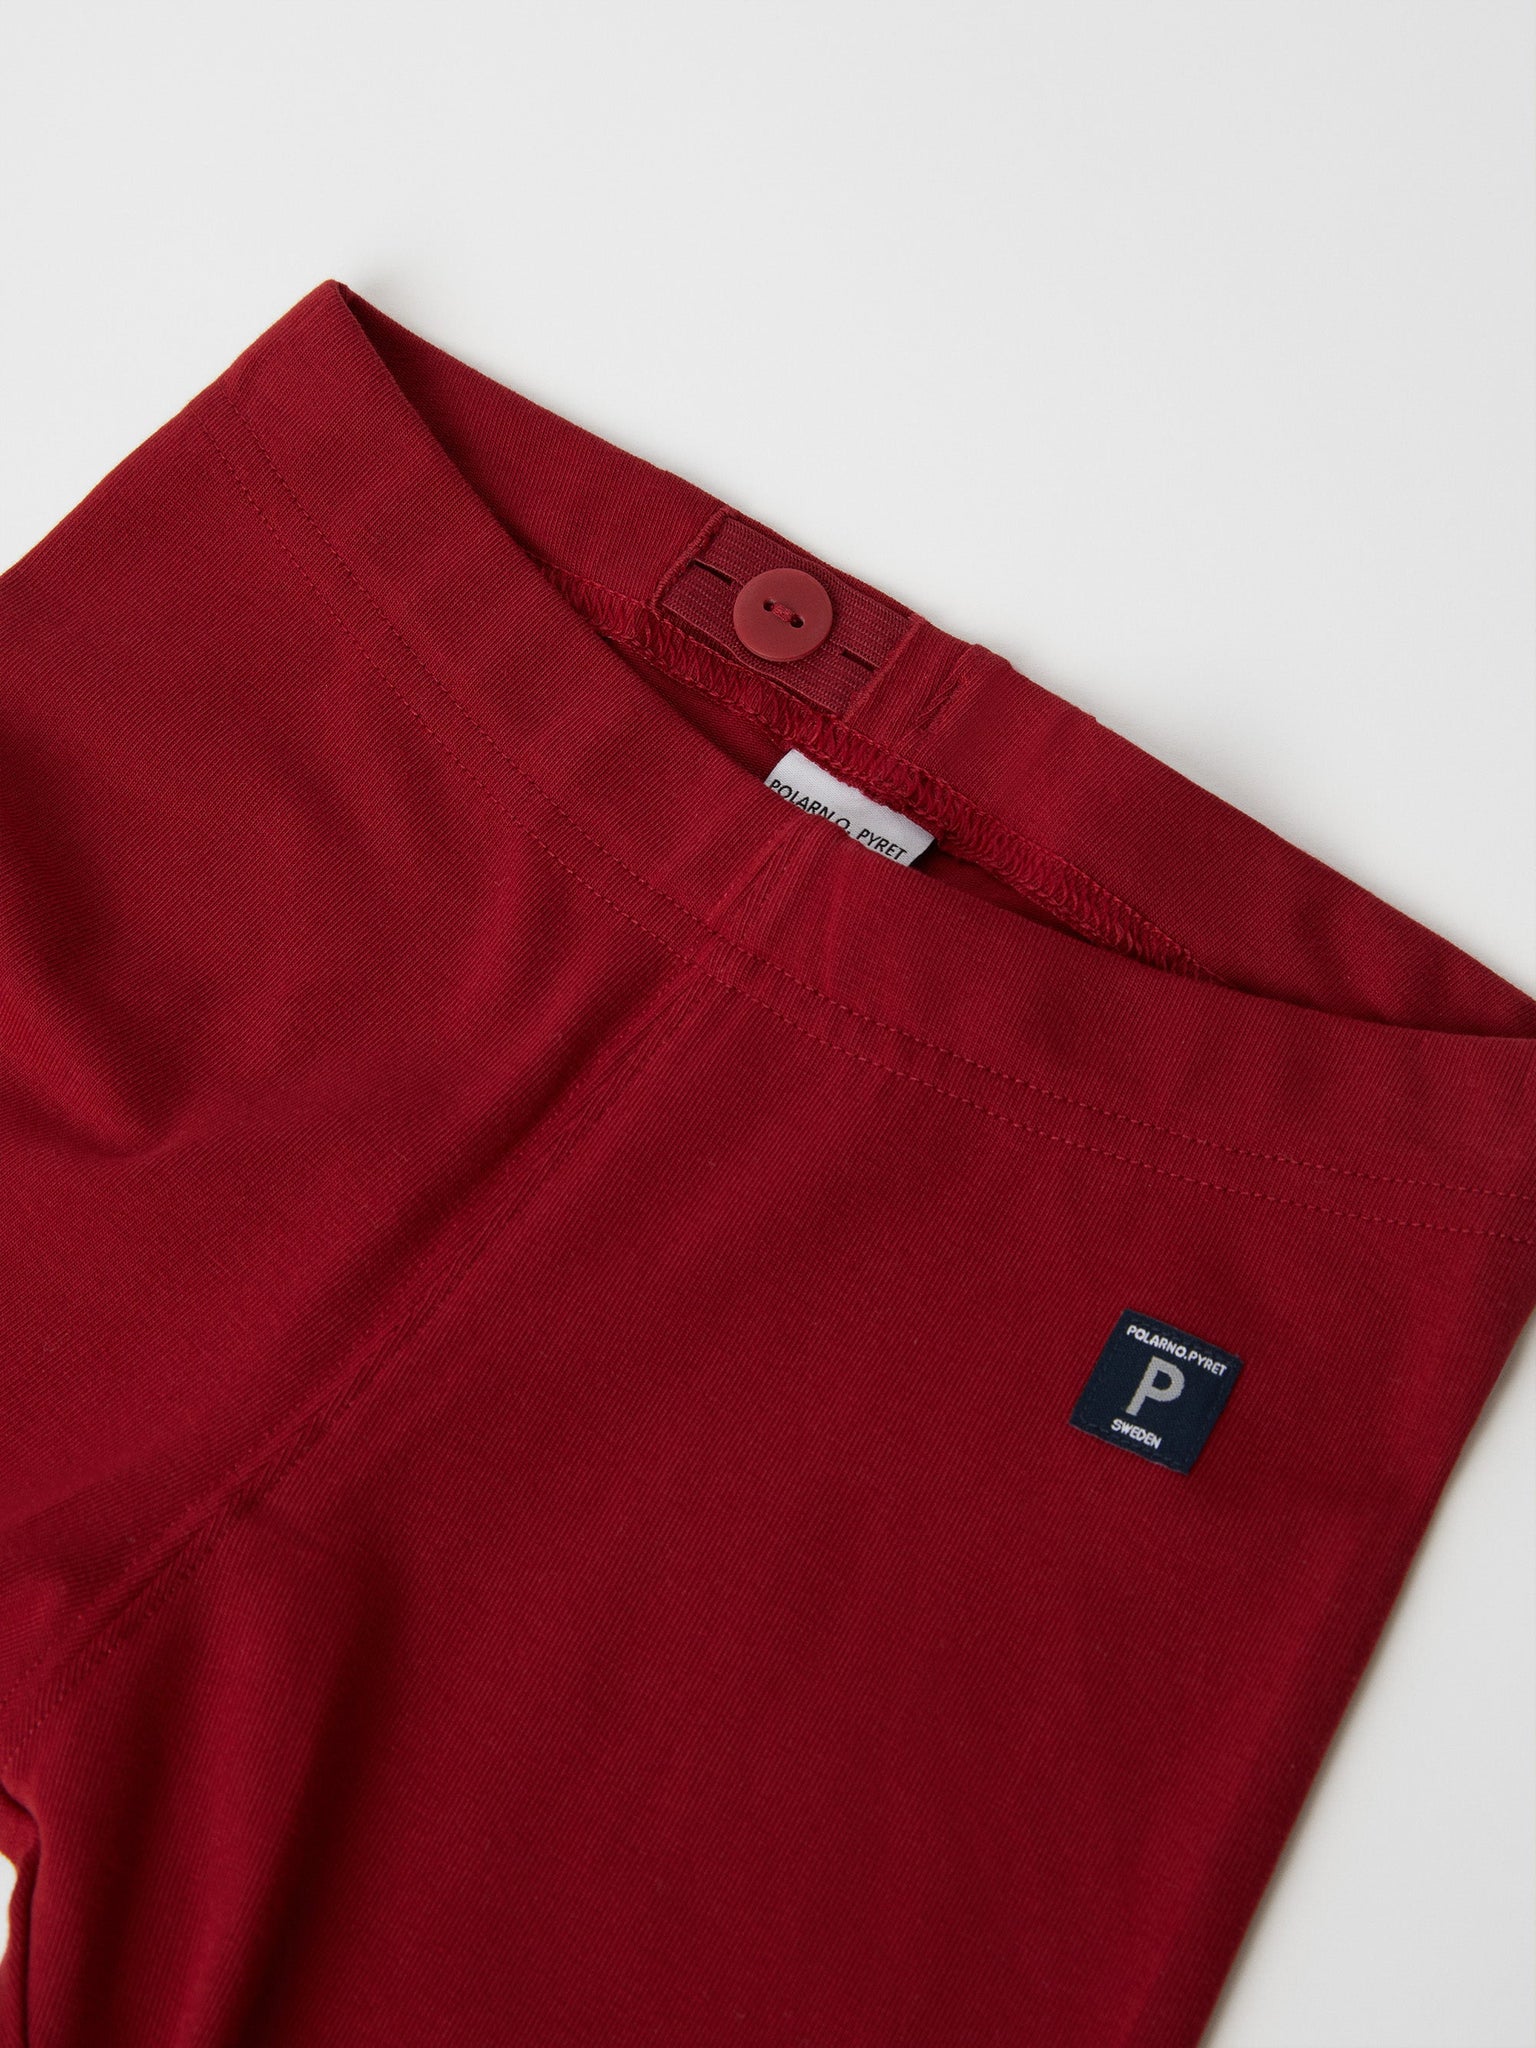 Red Organic Cotton Kids Leggings from the Polarn O. Pyret kidswear collection. Ethically produced kids clothing.